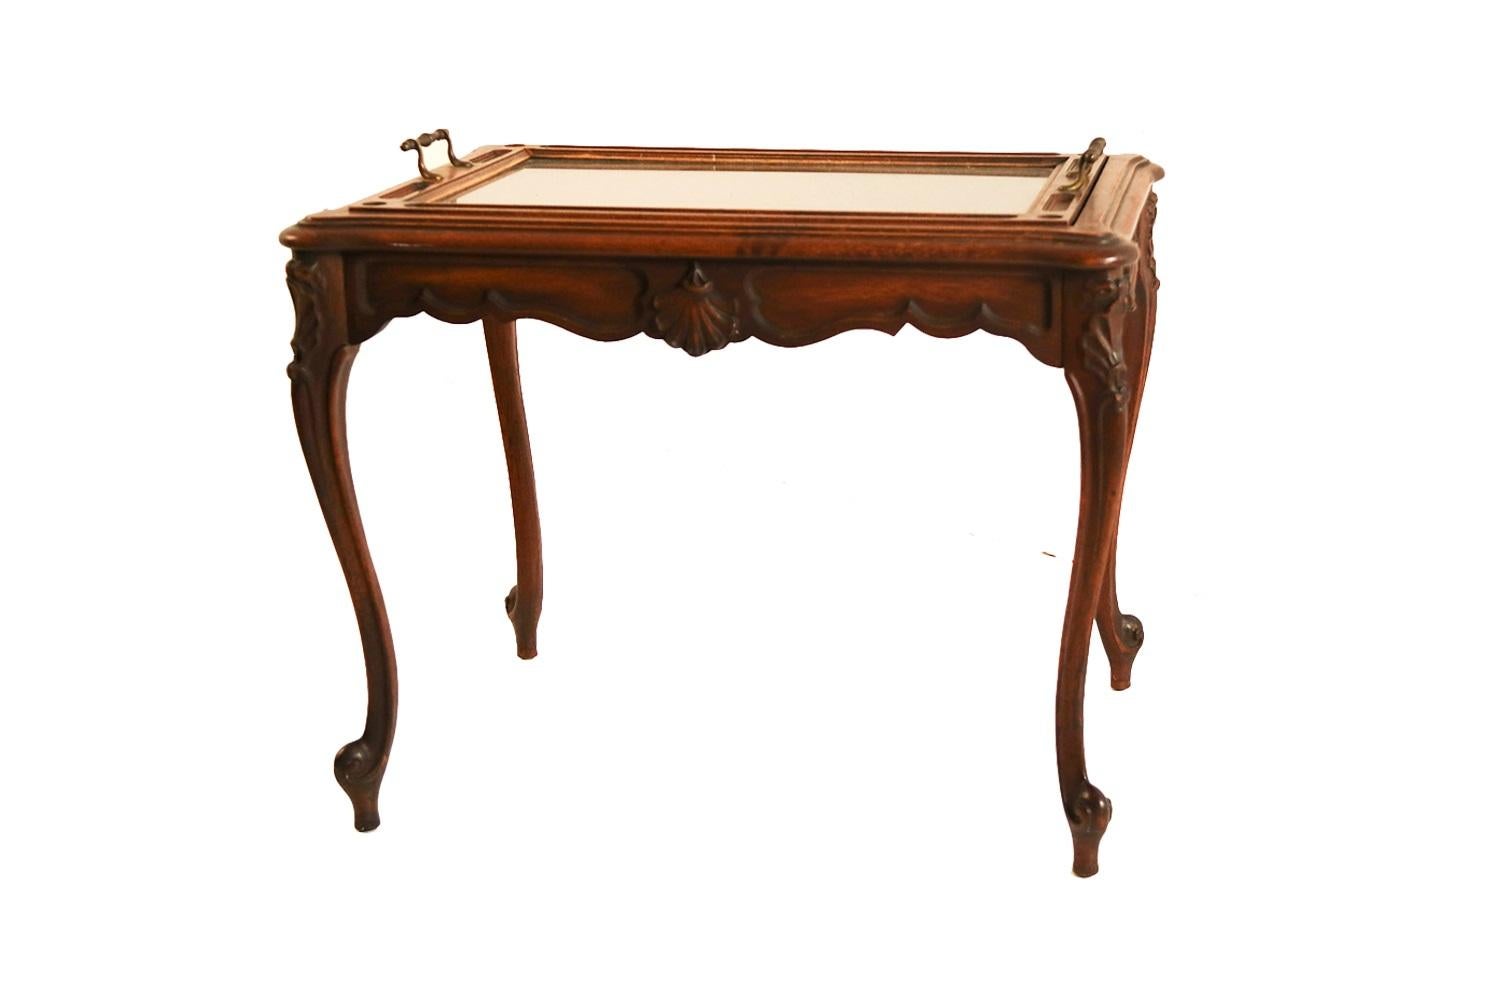 A vintage Queen Anne style mahogany butler, tea table, coffee table with removable glass tray top, early 20th century. This Queen Anne style coffee/ end table features a removable glass center tray inset on a hand carved mahogany frame with